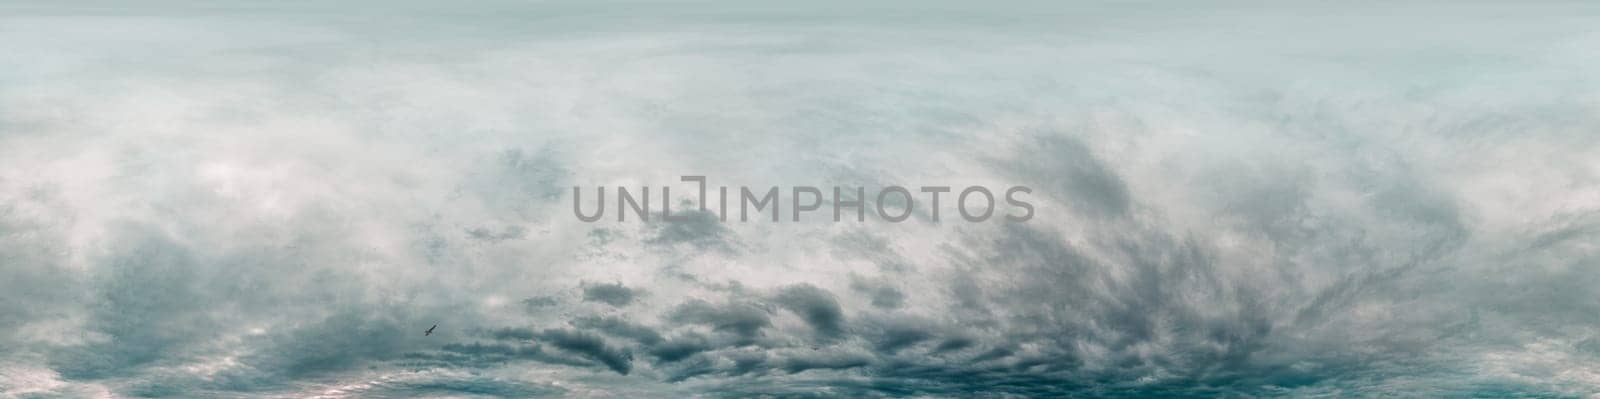 Dark moody rain clouds in dramatic overcast sky. Seamless 360 HDR spherical panorama. Full zenith or sky dome in 3D environment, sky replacement for aerial drone panoramas. Climate and weather change